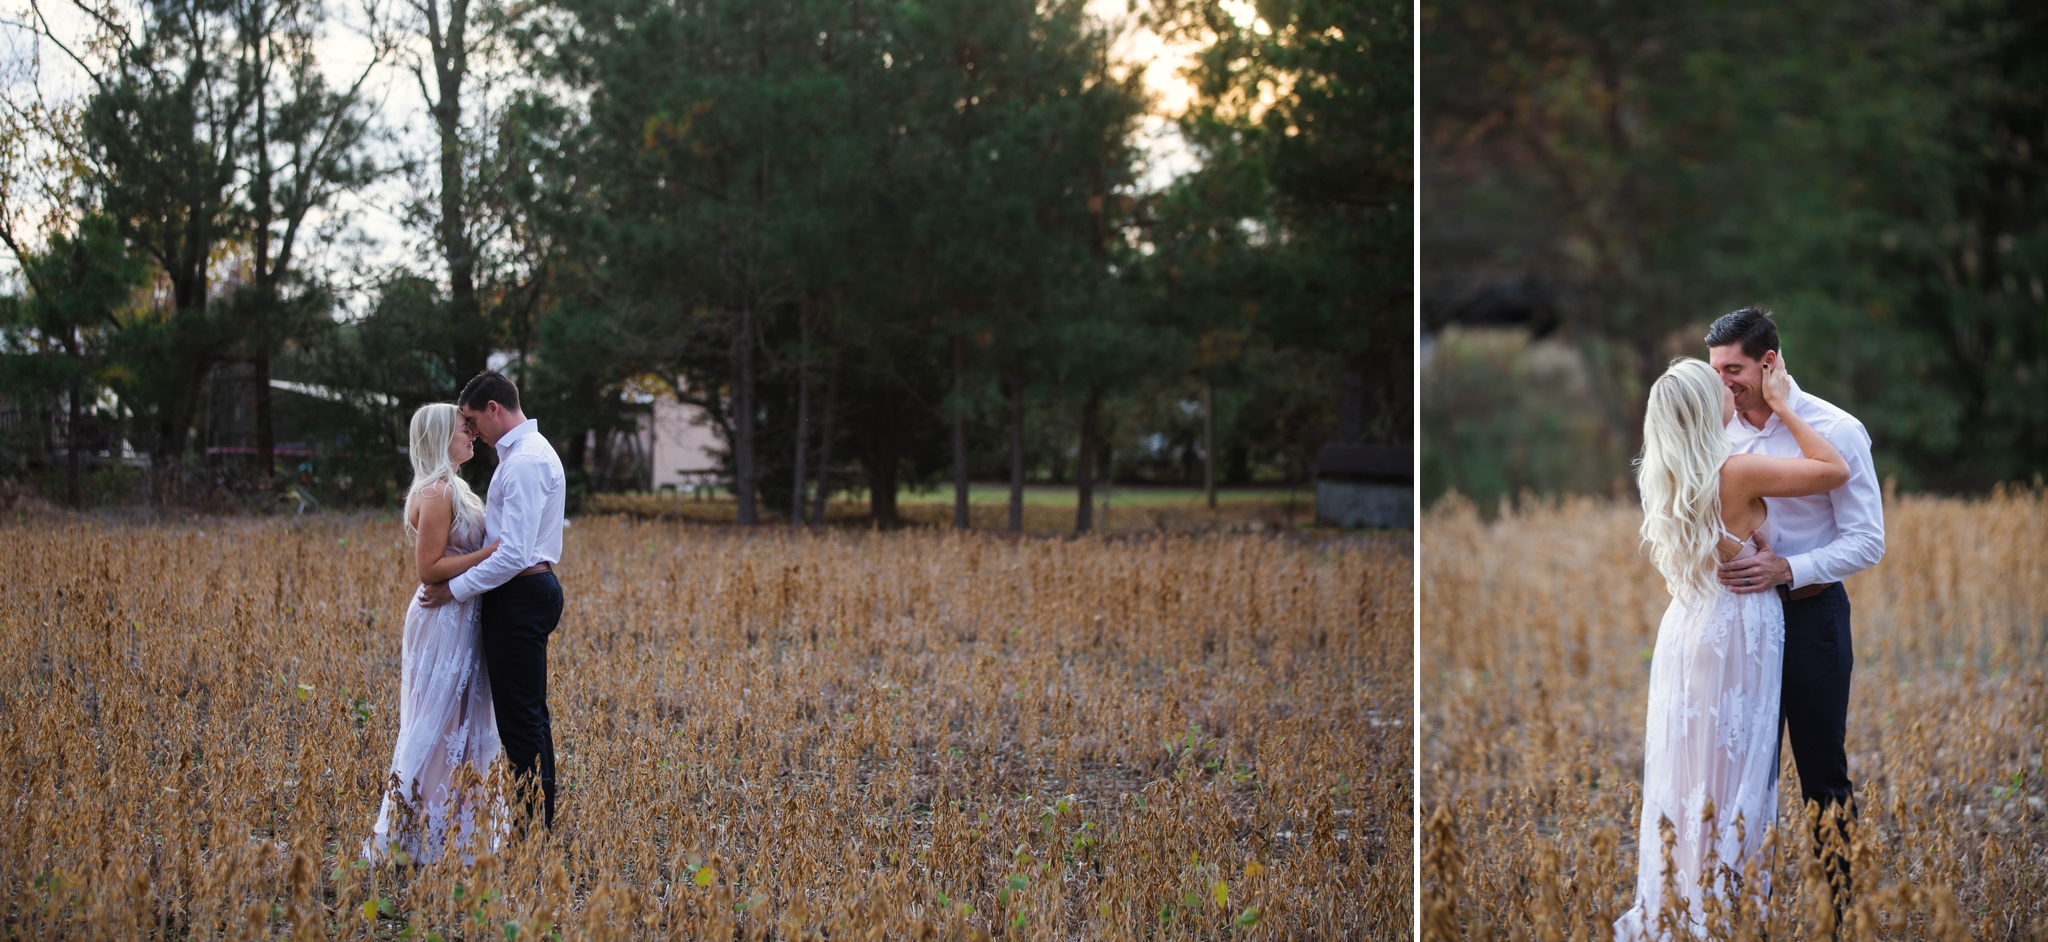 Couples photography in a Cornfield - Fayetteville North Carolina Engagement Photographer